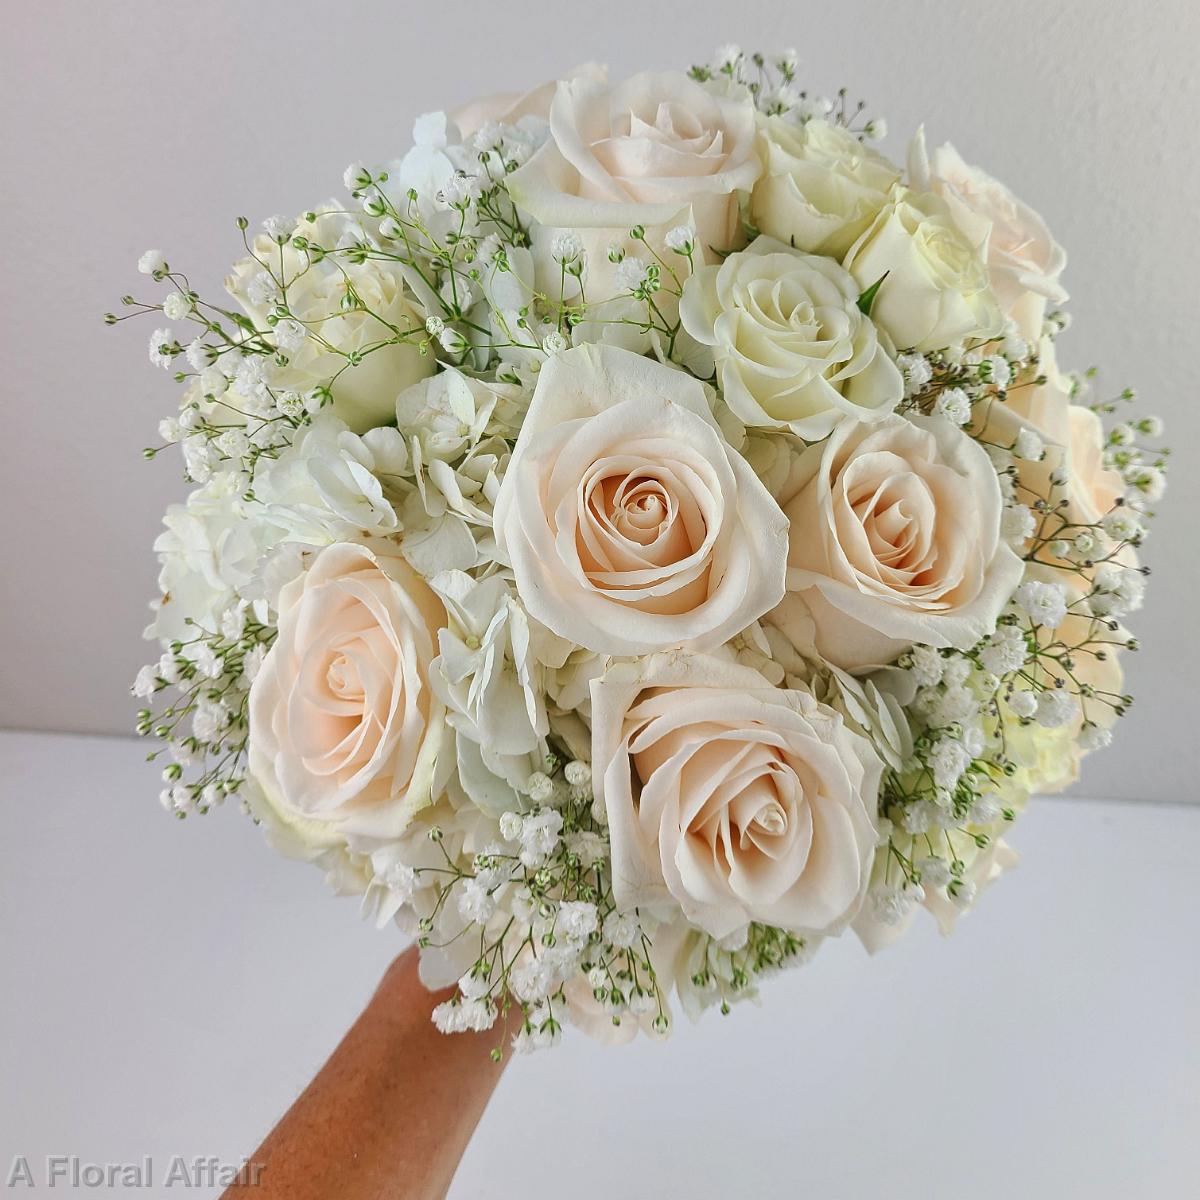 BB1568-White Rose and Babys Breath Bridal Bouquet